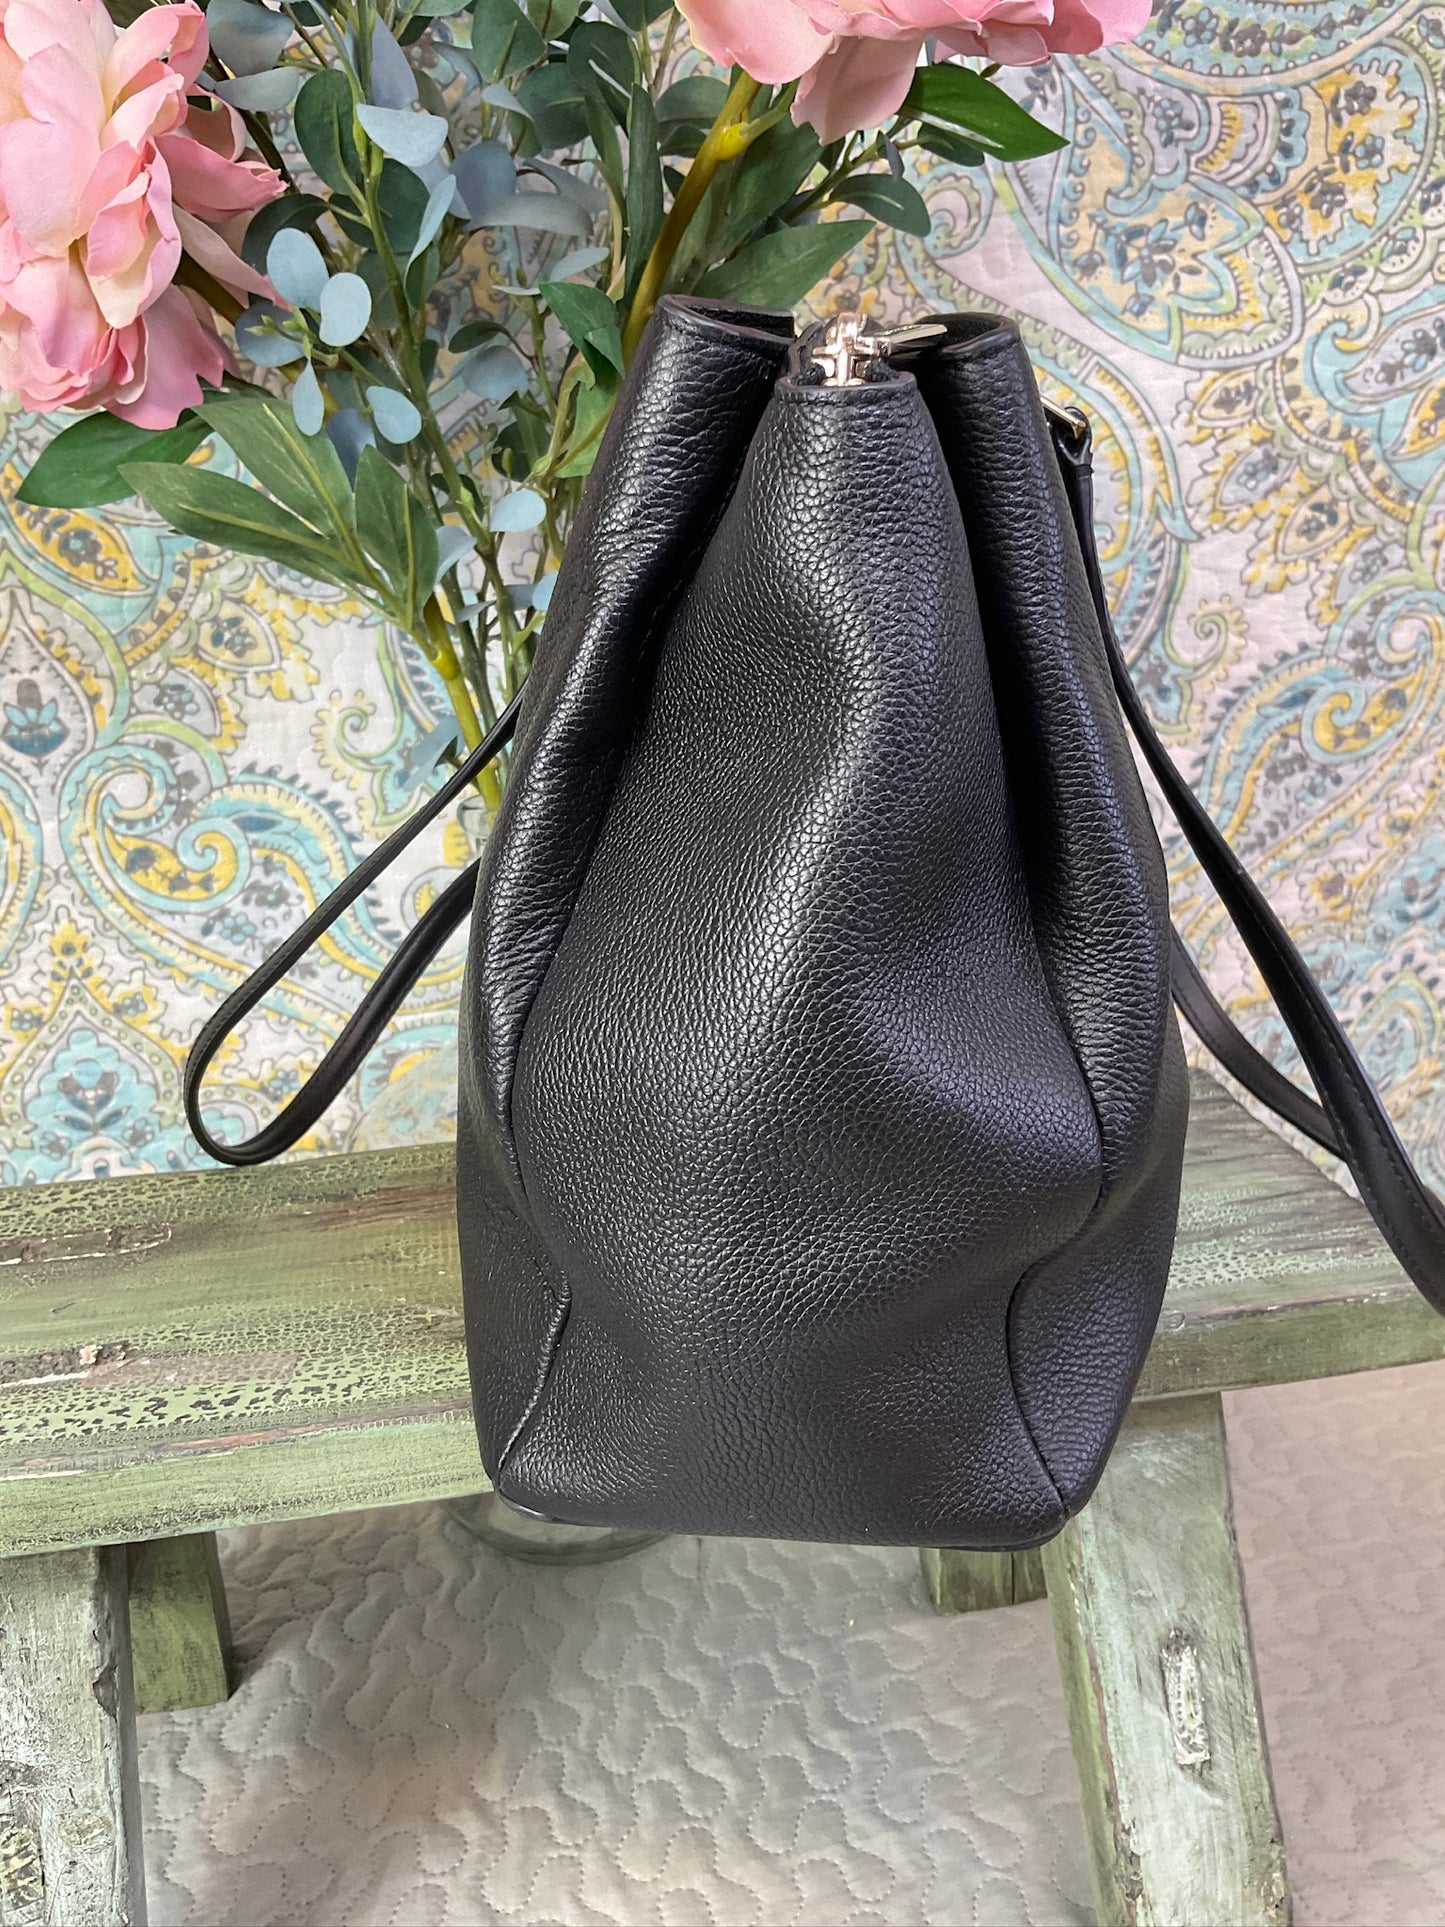 Black Kate Spade Tote W/ Gold Accents